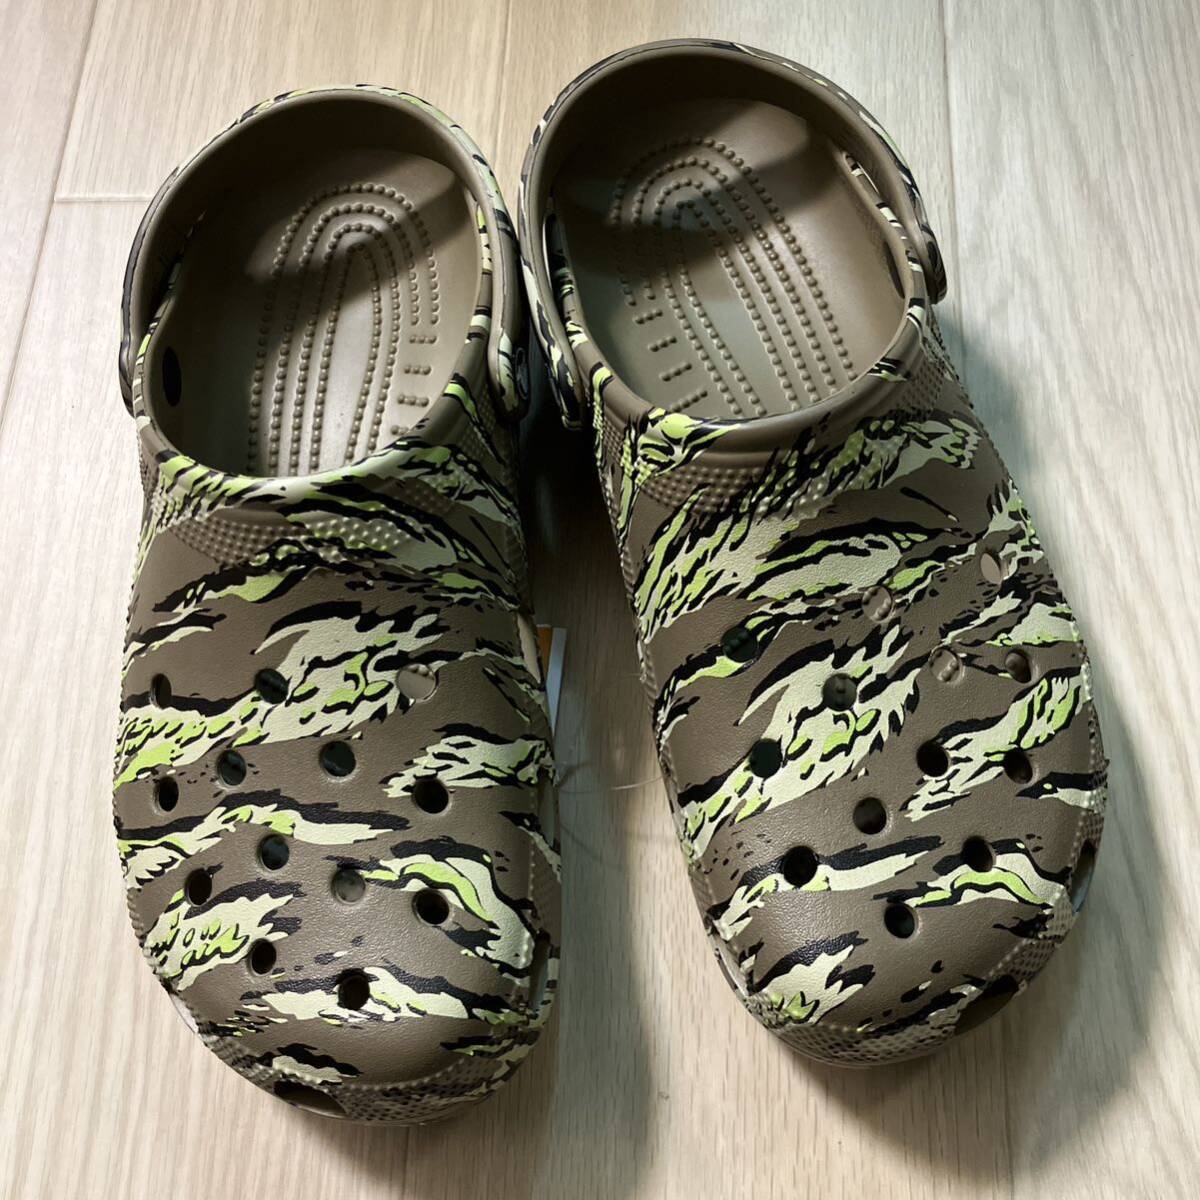  new goods 28. Crocs Classic printed duck clog free shipping 